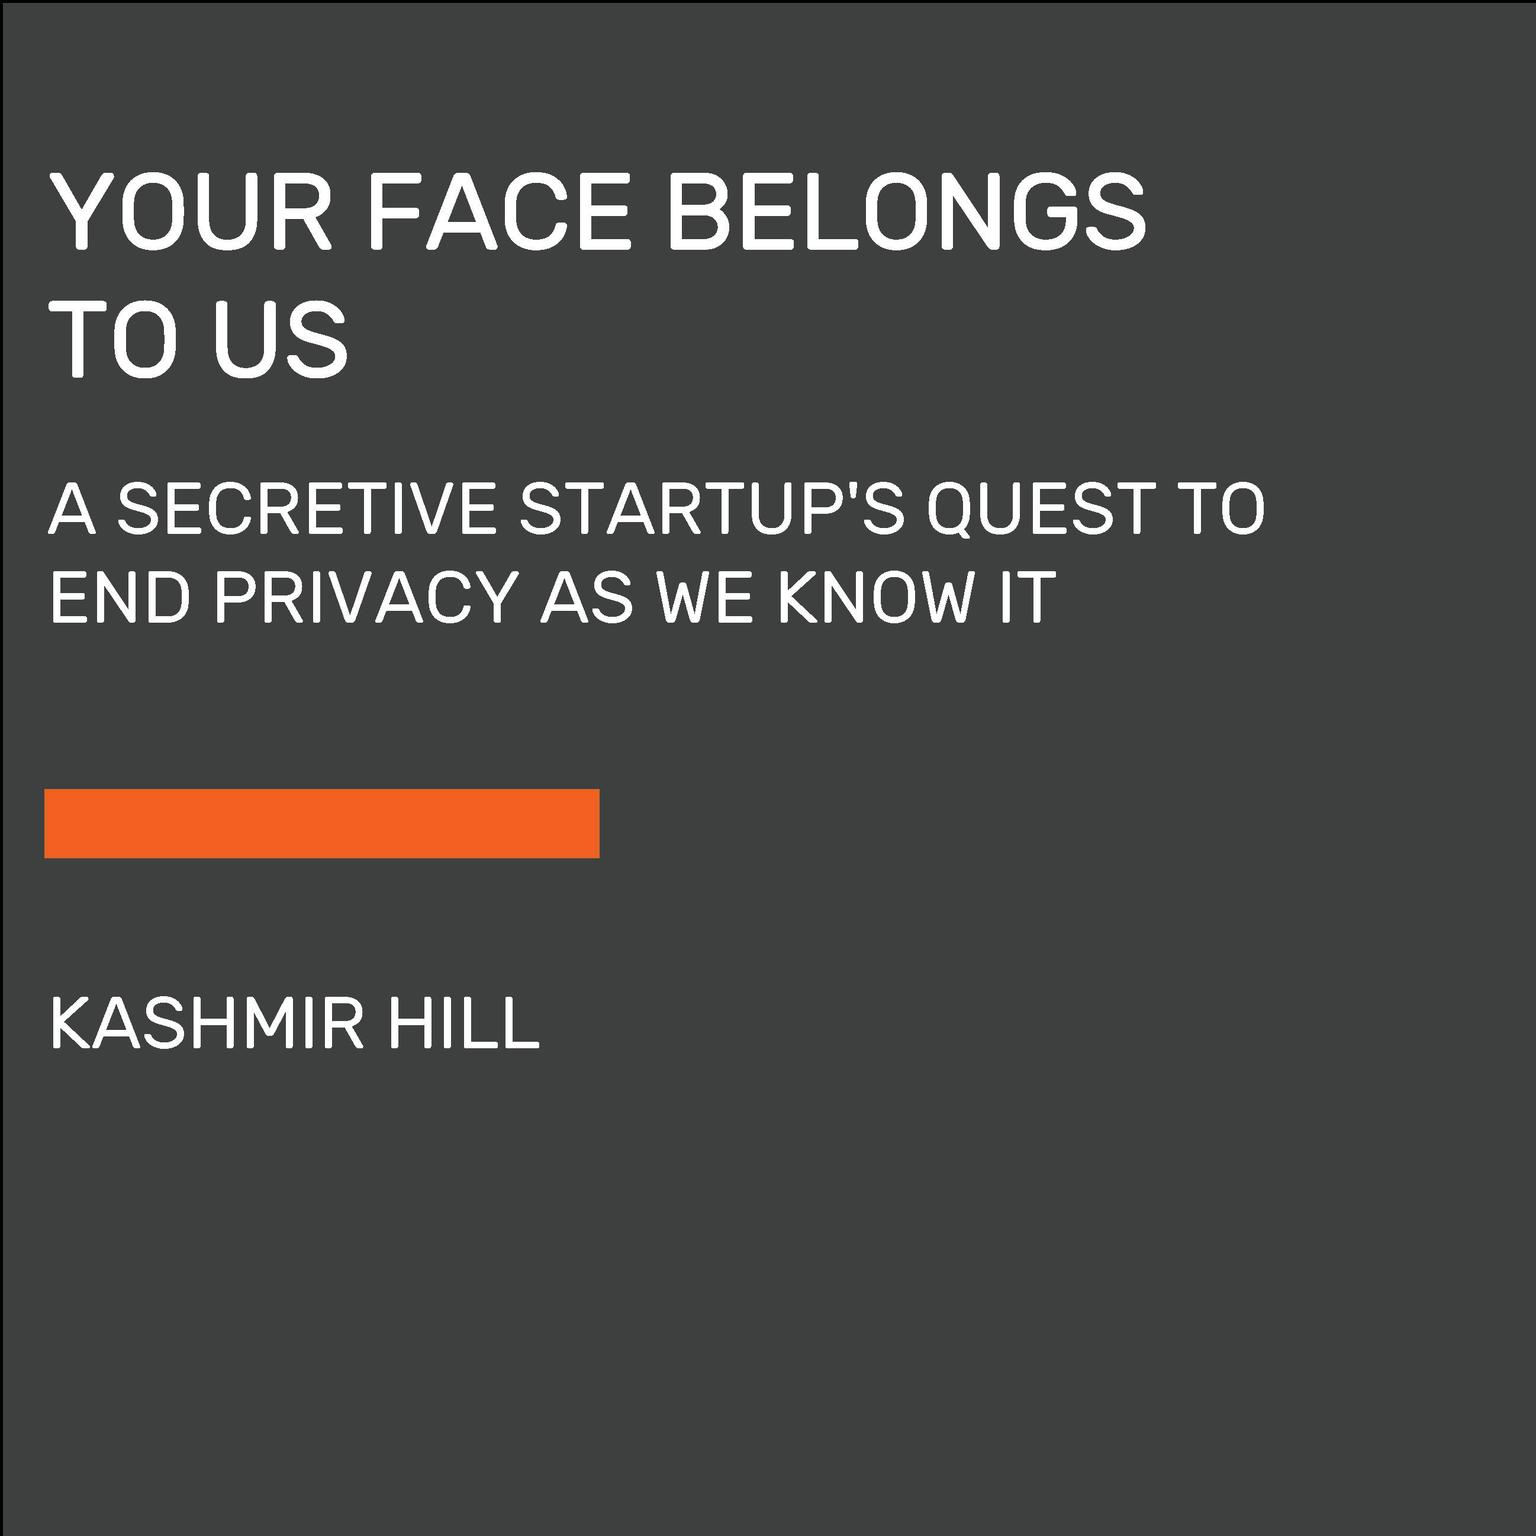 Your Face Belongs to Us: A Secretive Startups Quest to End Privacy as We Know It Audiobook, by Kashmir Hill